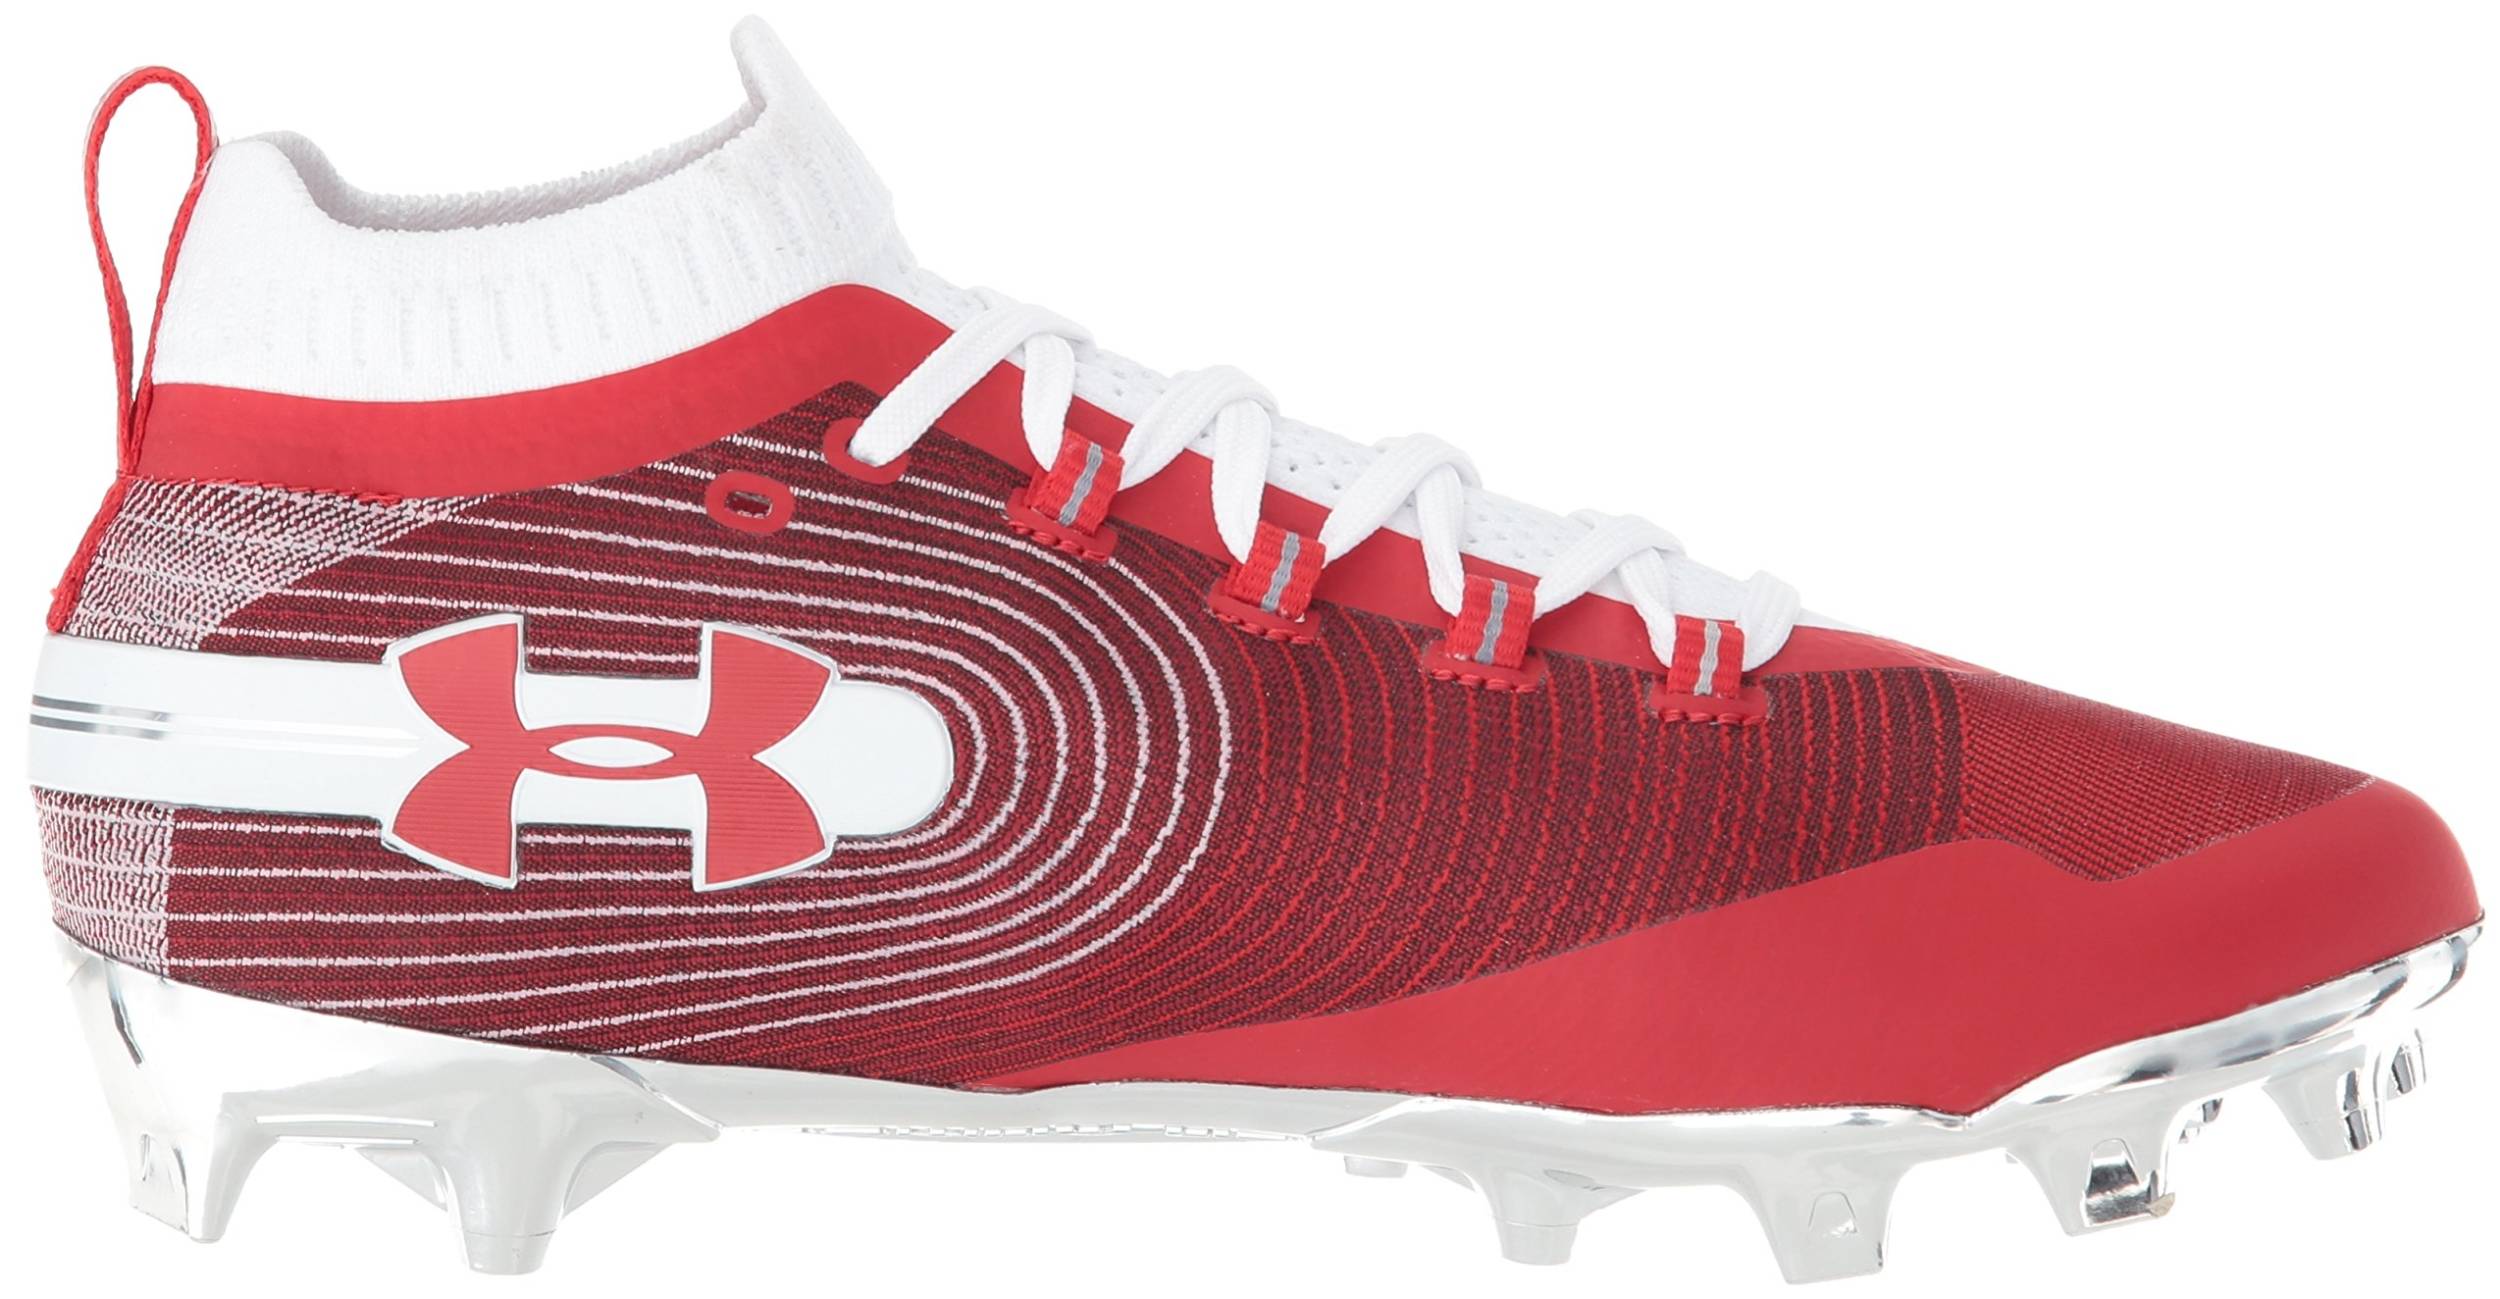 red suede under armour cleats